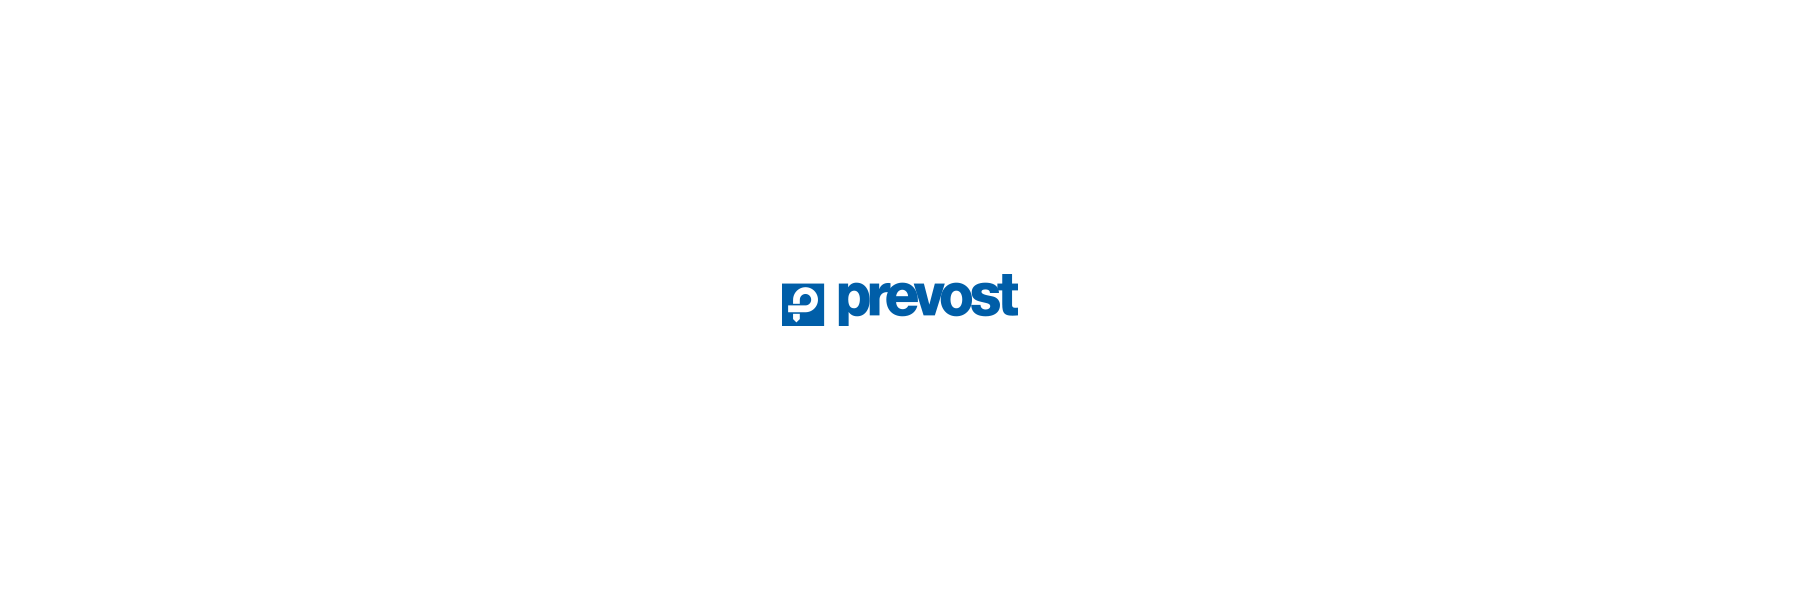 Prevost Piping Systems 

KNOWHOW UND INNOVATION...